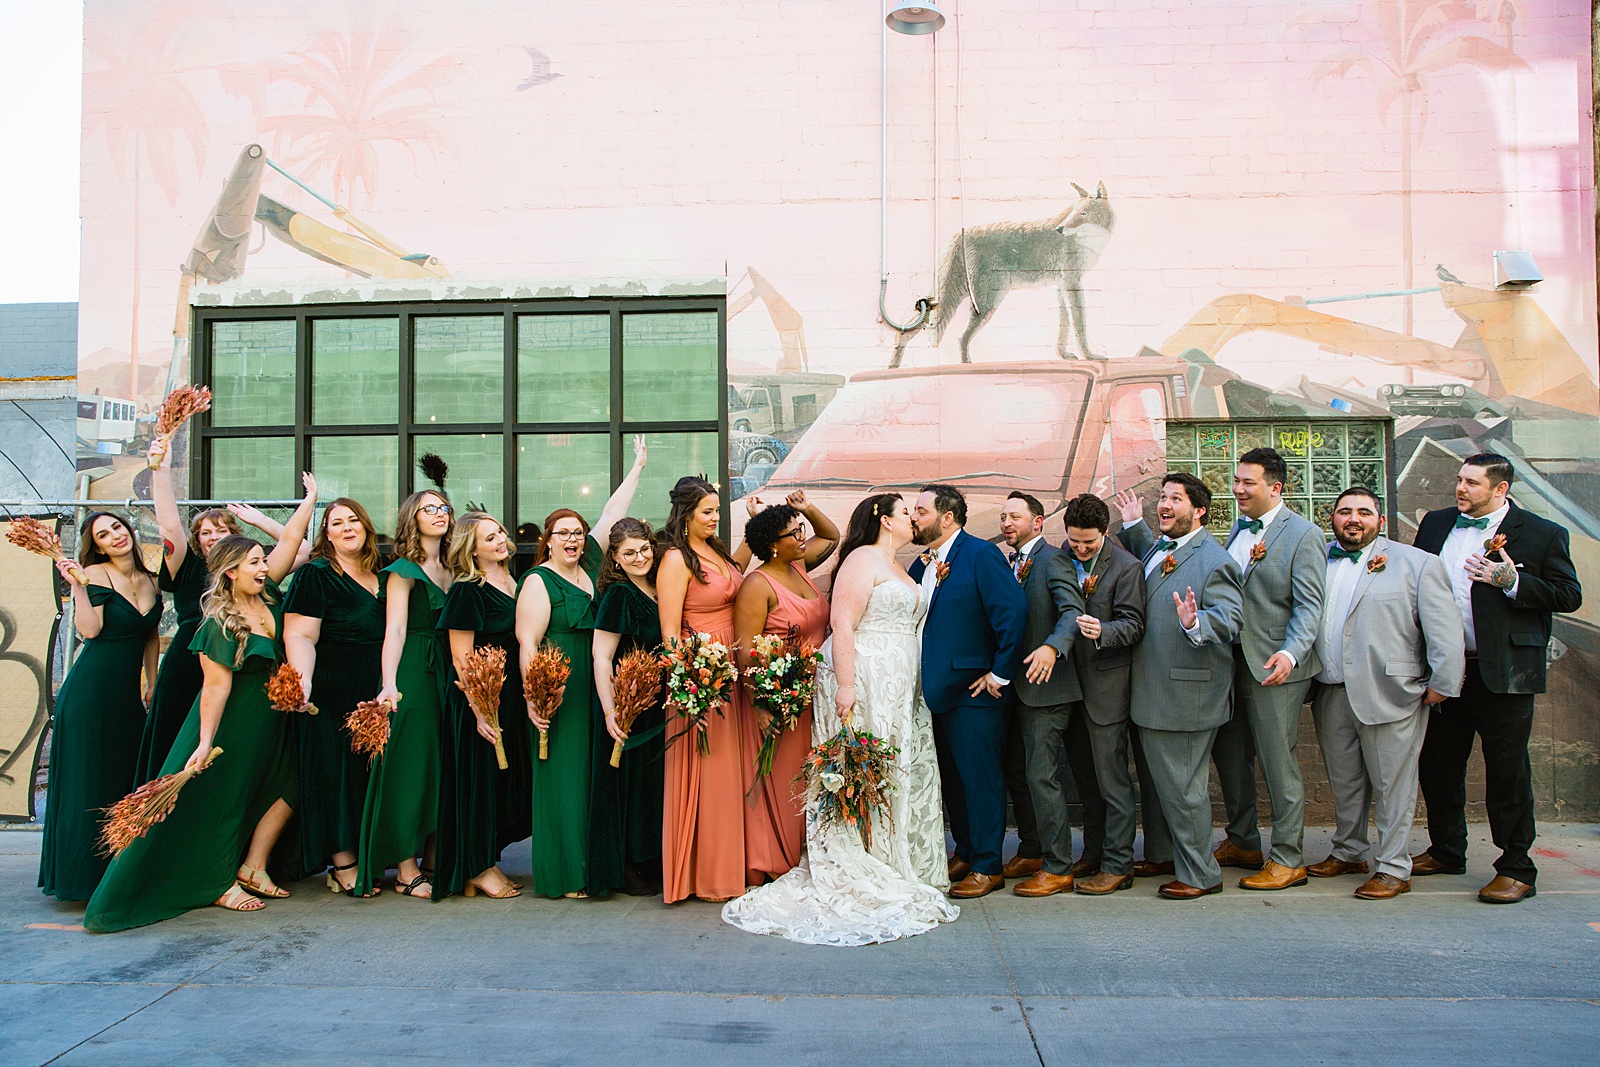 Bridal party laughing together at MonOrchid wedding by Phoenix wedding photographer PMA Photography.